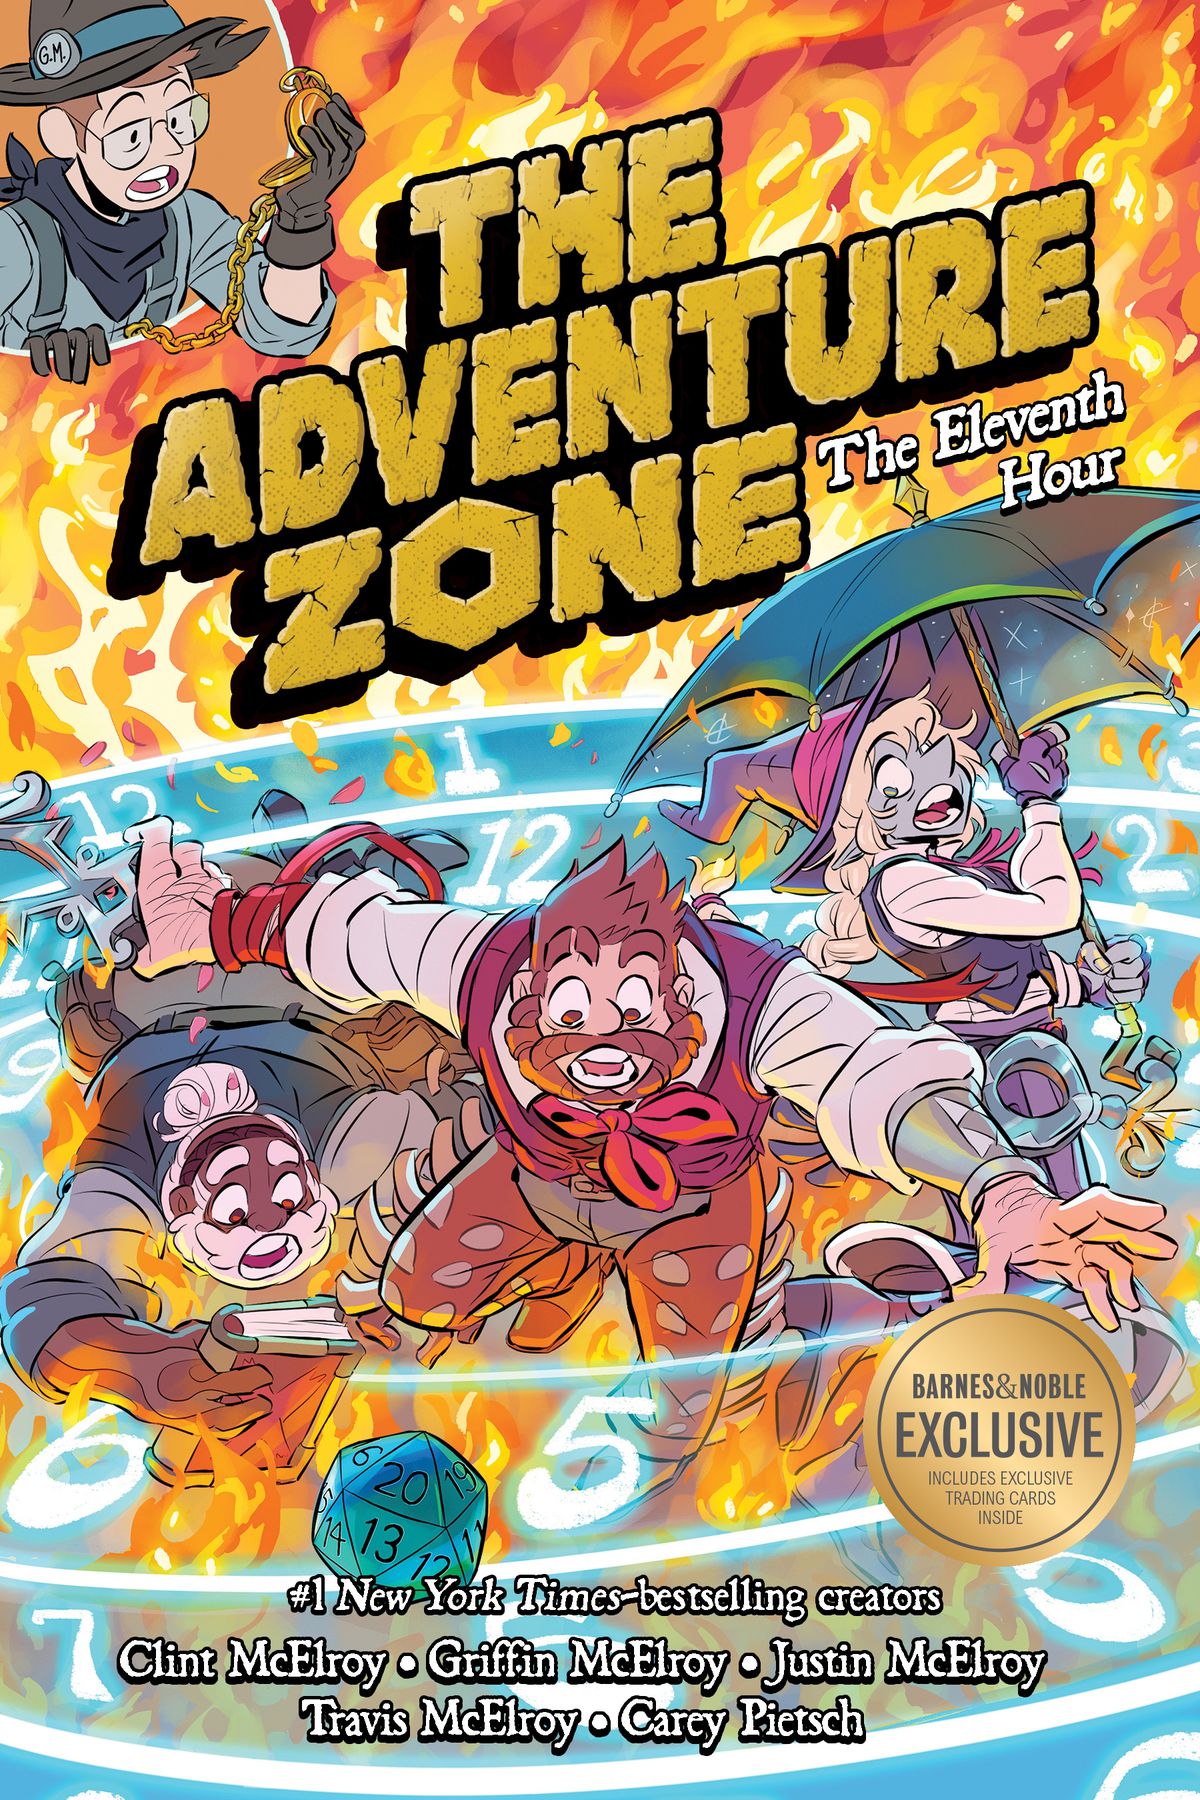 Merle, Magnus, and Taako are in the center of glowing circles of numbers. Behind them is an inferno. Above them text reads “The Adventure Zone The Eleventh Hour”. In the top right corner is Griffin, holding a pocketwatch. Text at the bottom reads “#1 New York Times-bestselling creators Clint McElroy Griffin McElroy Justin McElroy Travis McElroy Carey Pietsch”. In the bottom right corner is a gold circle with the text “Barnes &amp; Noble exclusive”